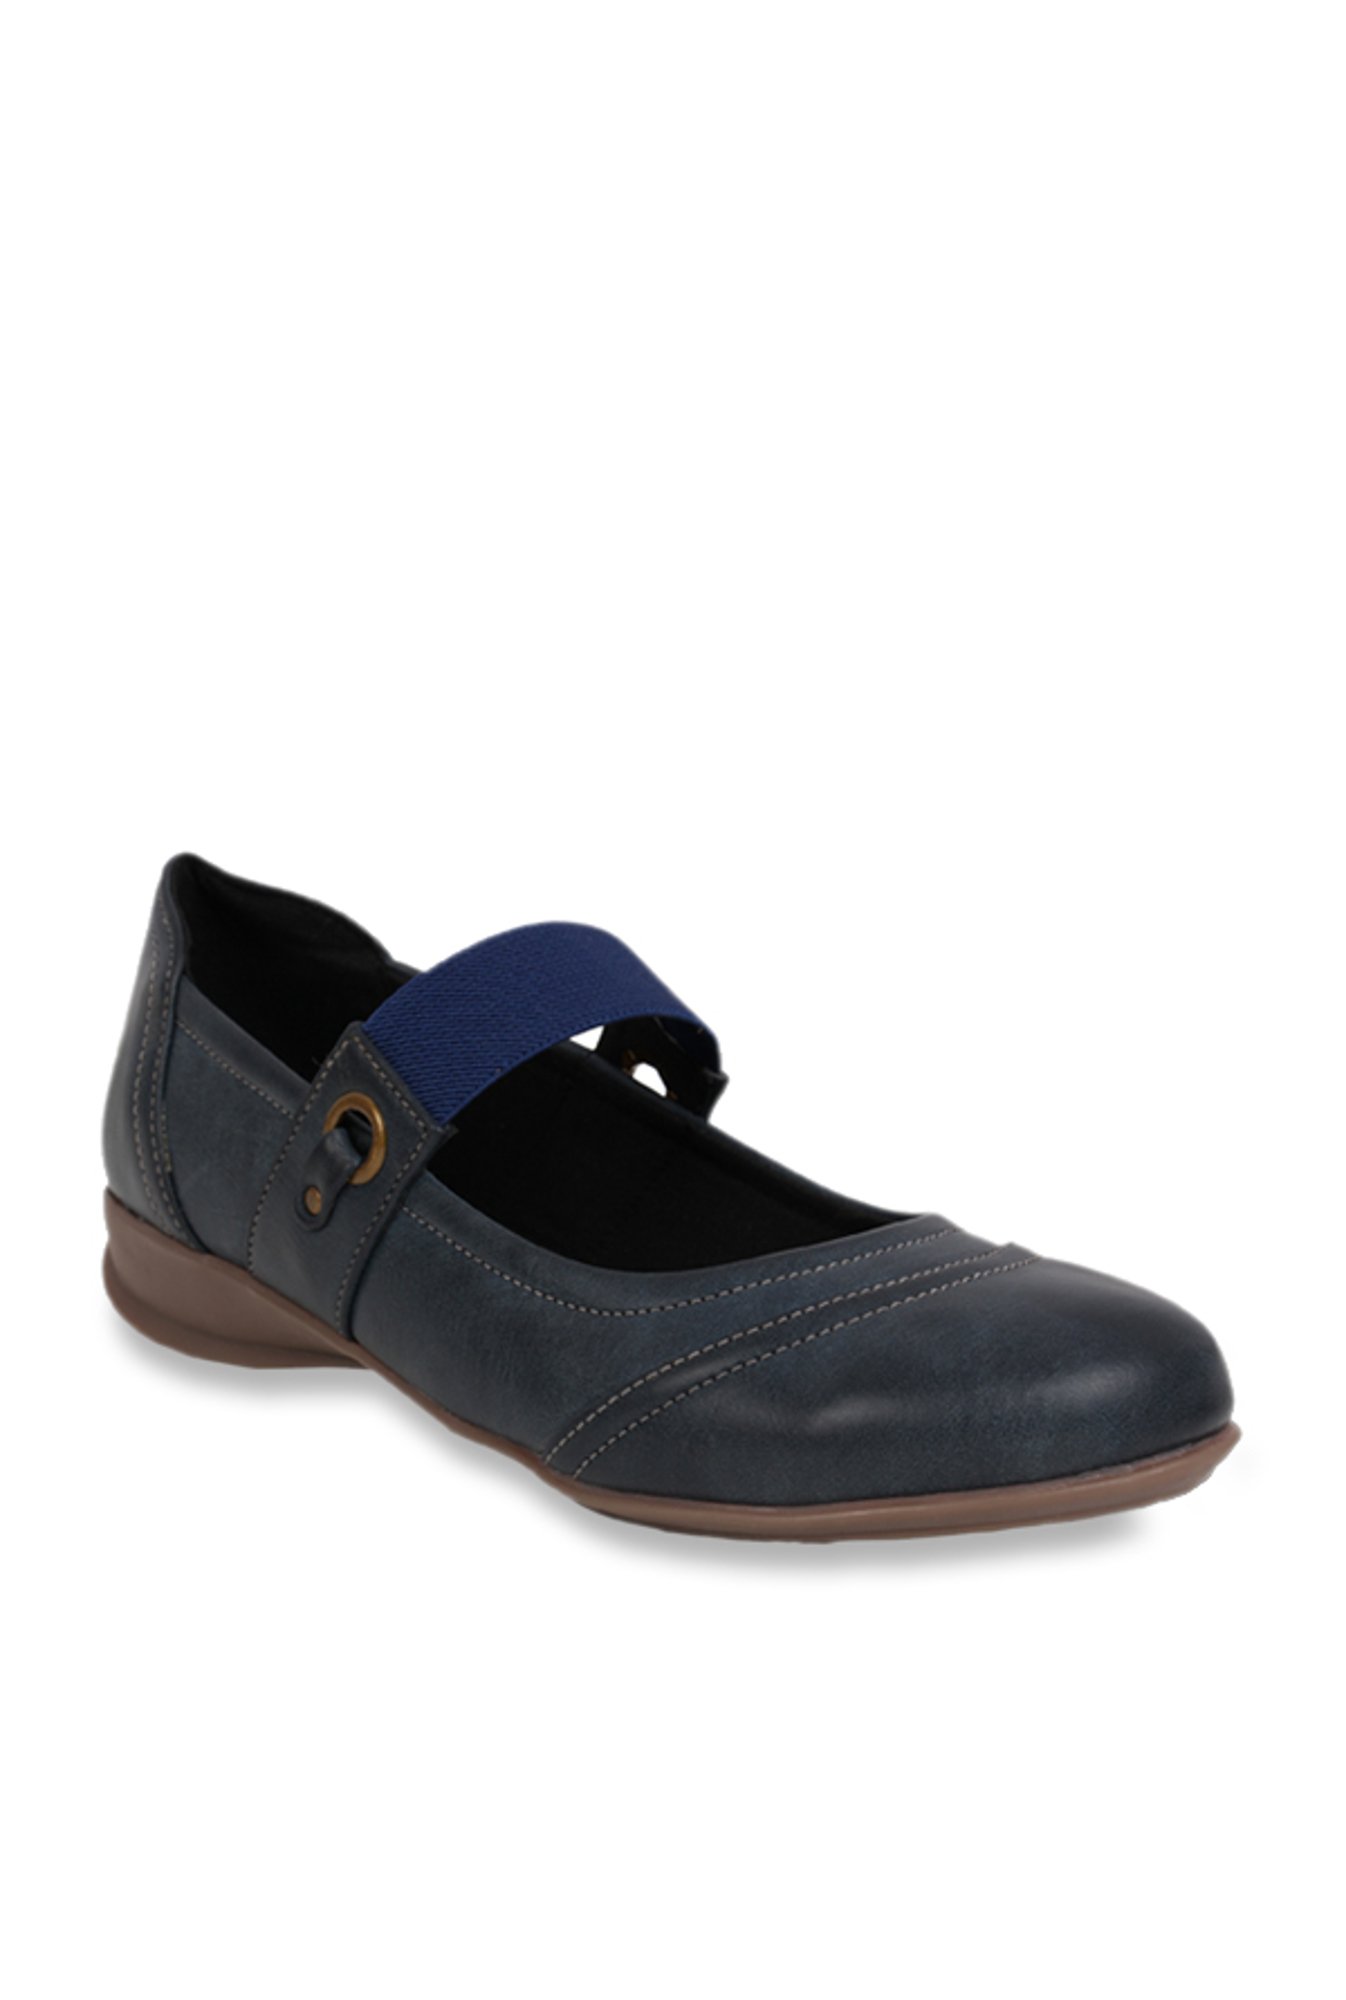 navy mary jane shoes